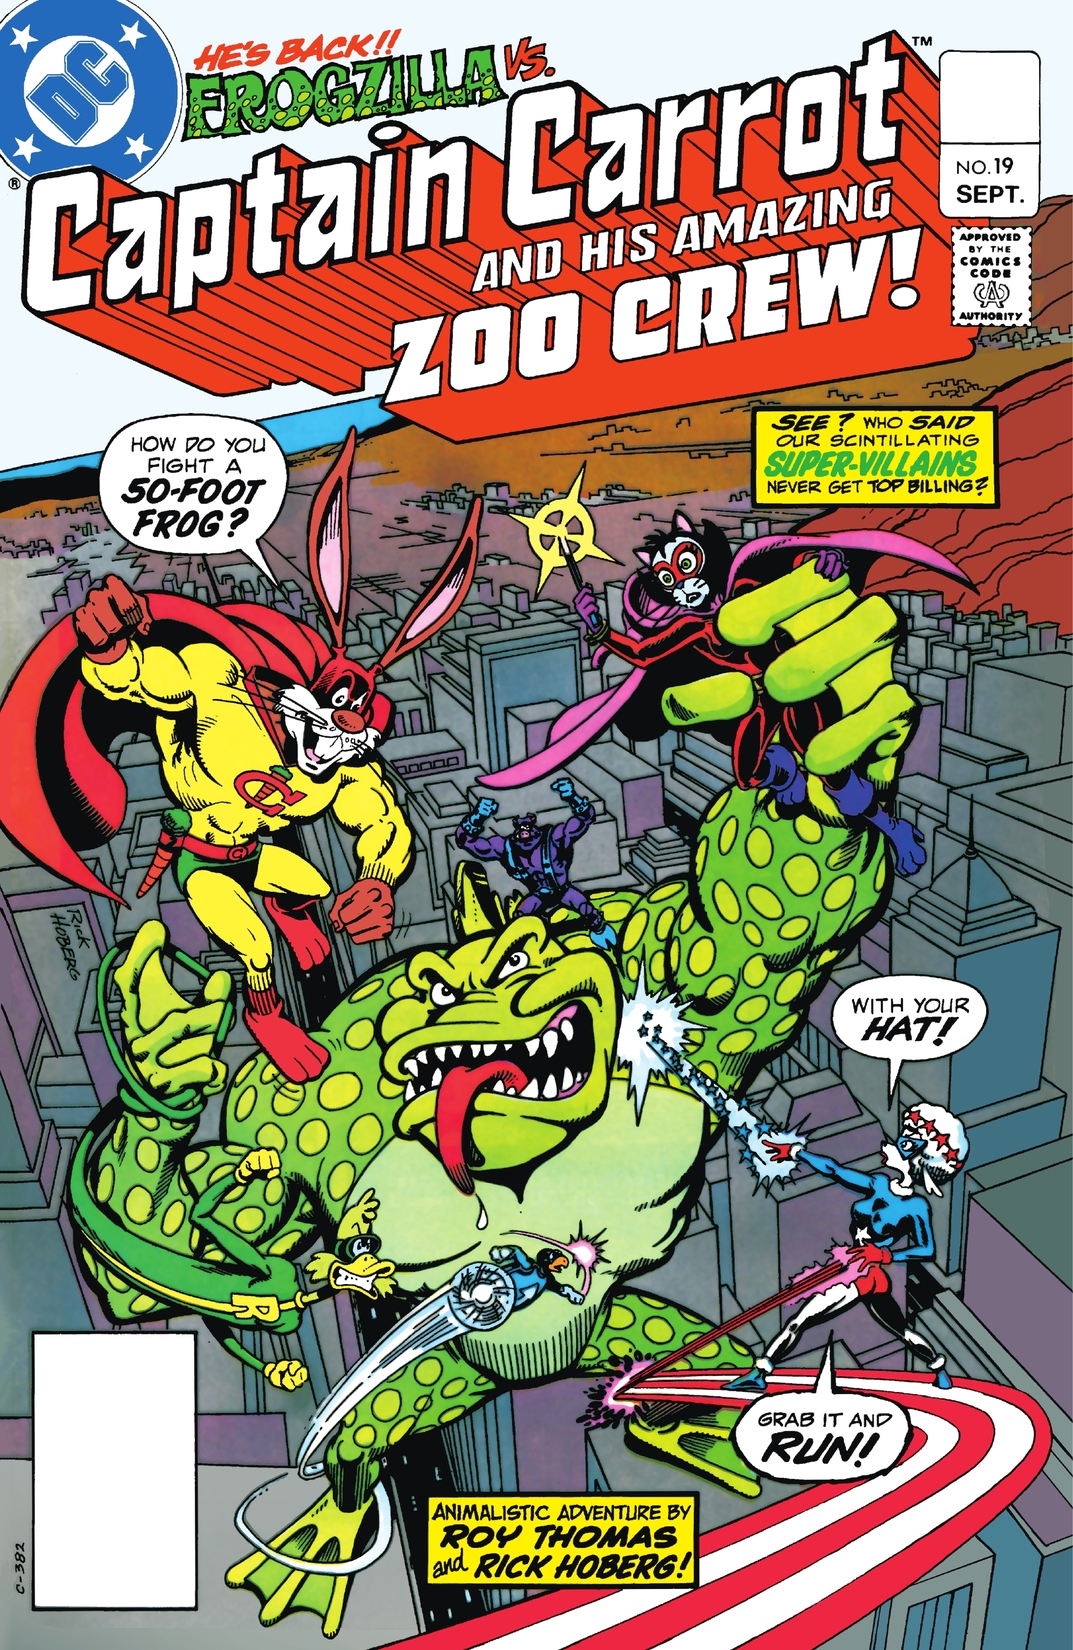 Captain Carrot and His Amazing Zoo Crew #19 preview images